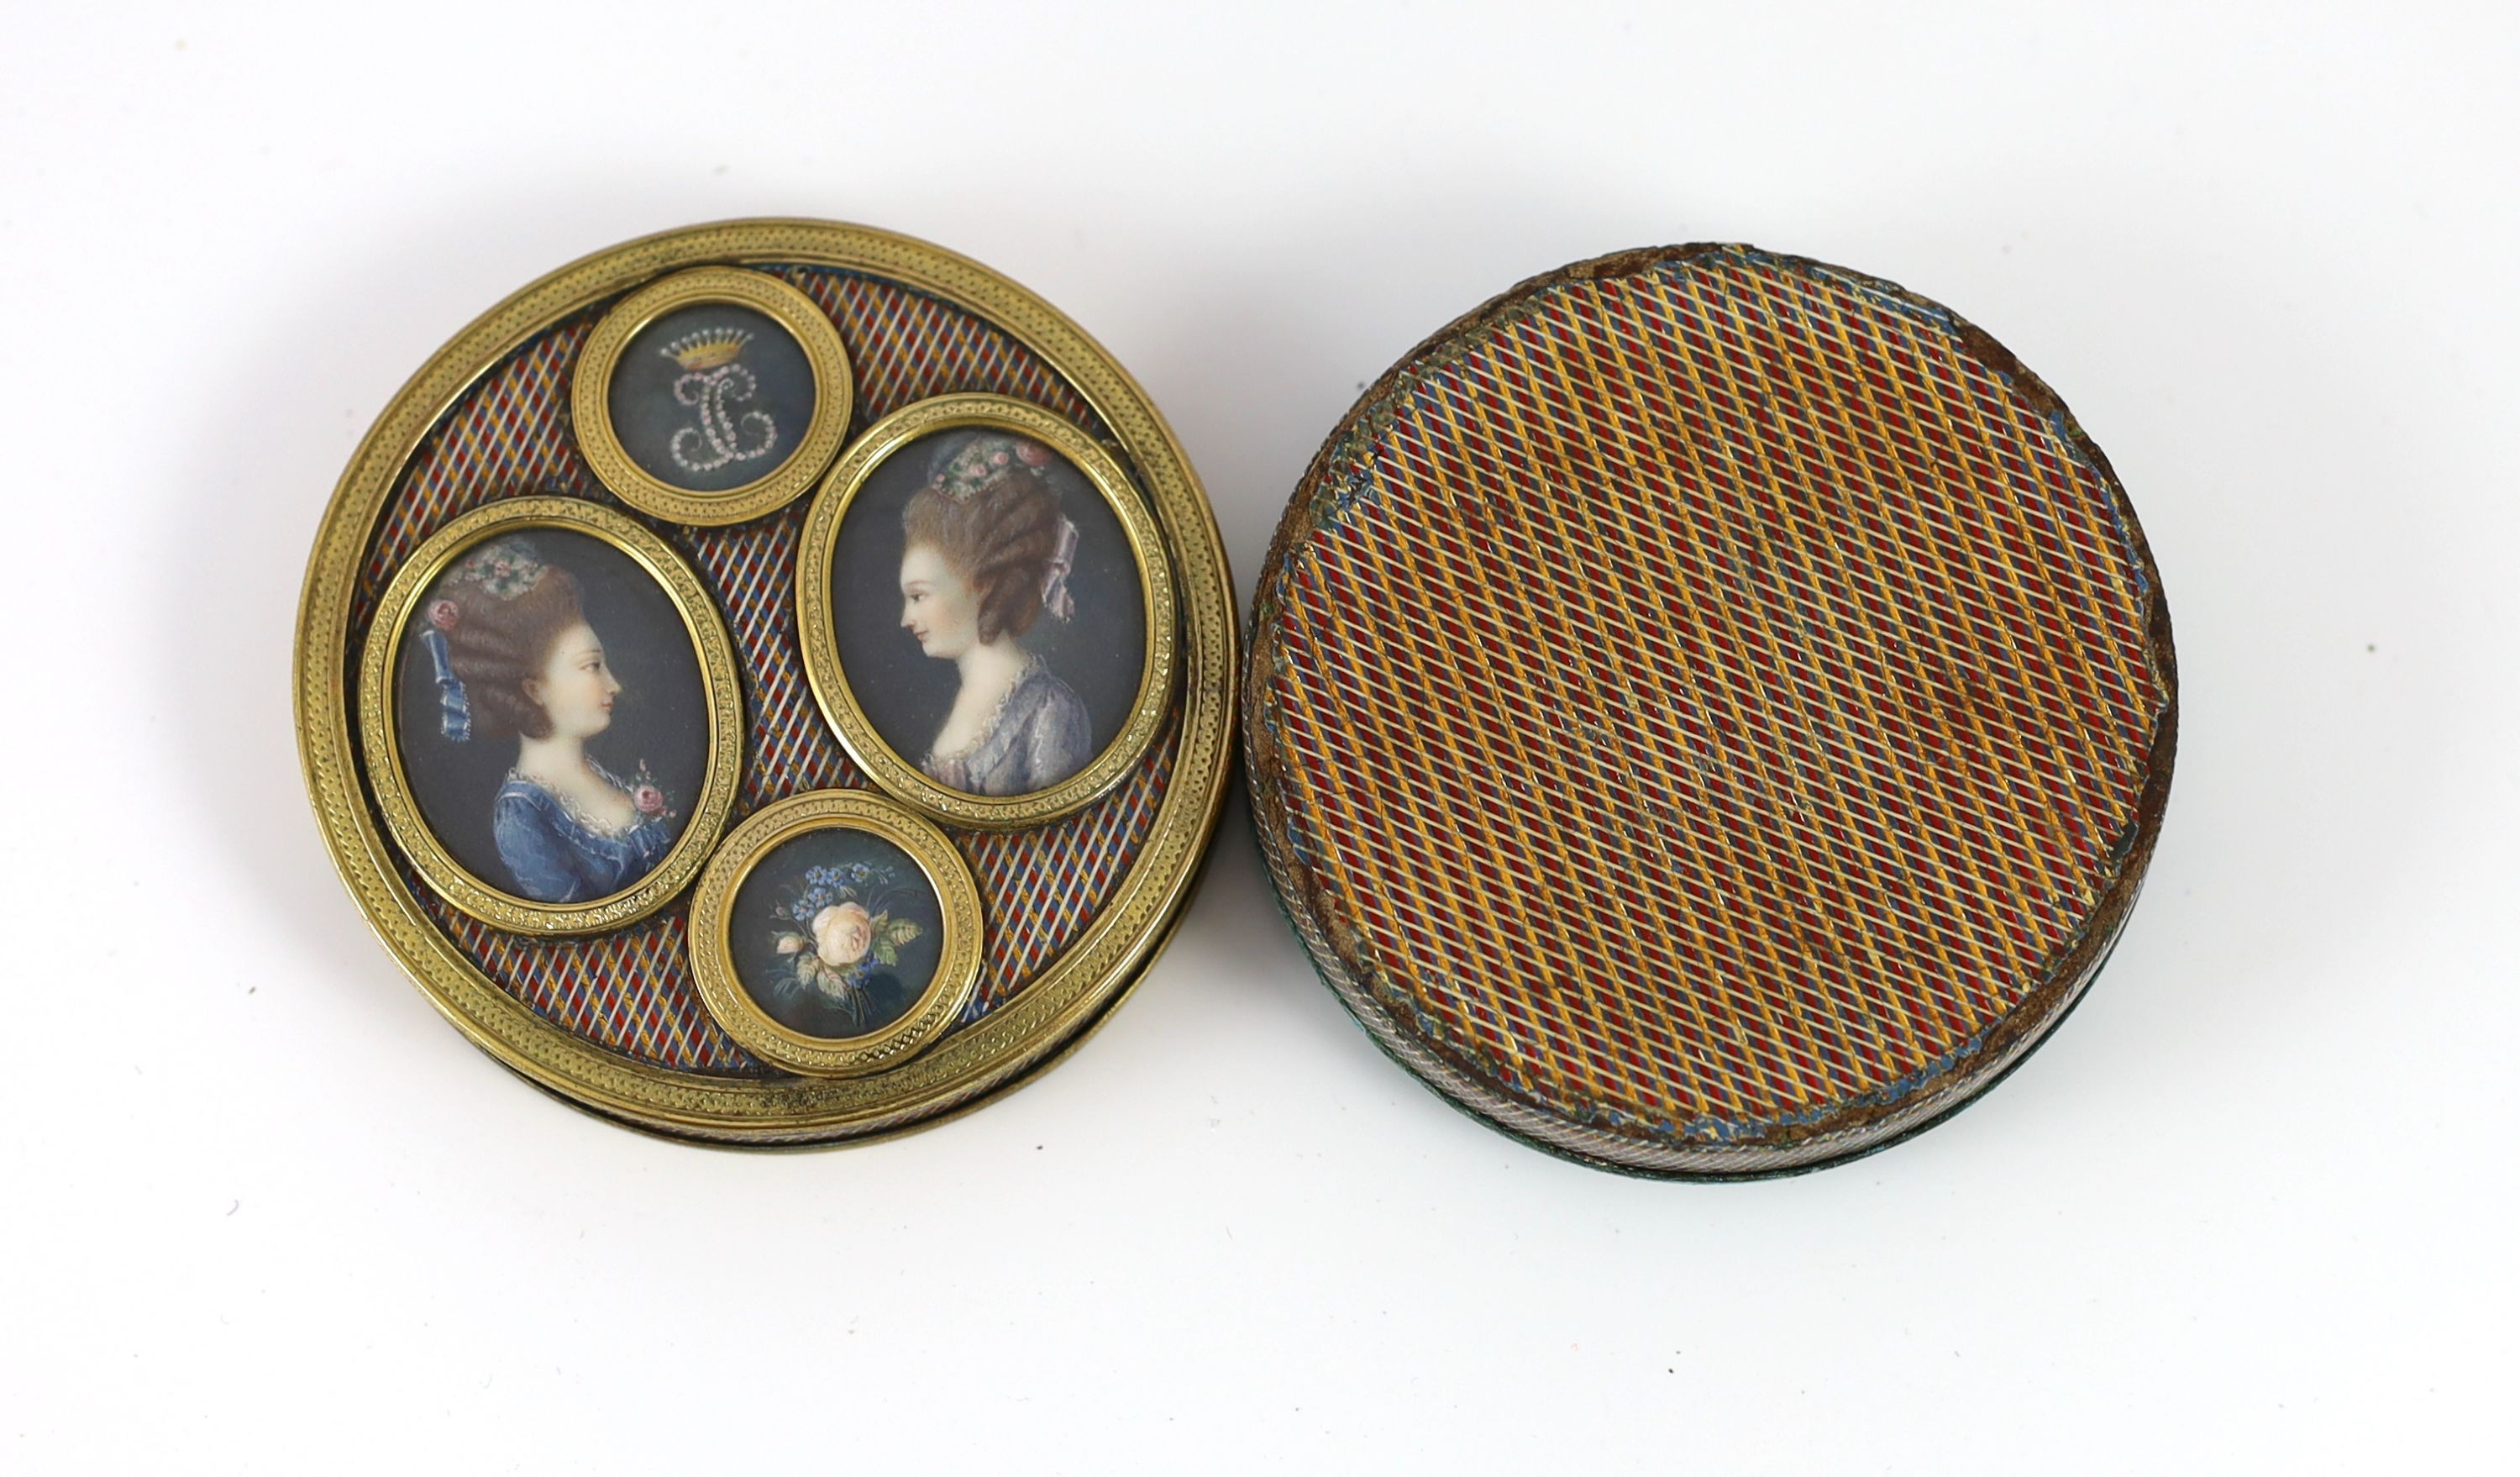 A late 18th century tortoiseshell poudre d'écaille box, the cover inset with two portraits of young ladies, below a monogram ‘JC’ with coronet, mounted in gilt metal 8cm diameter